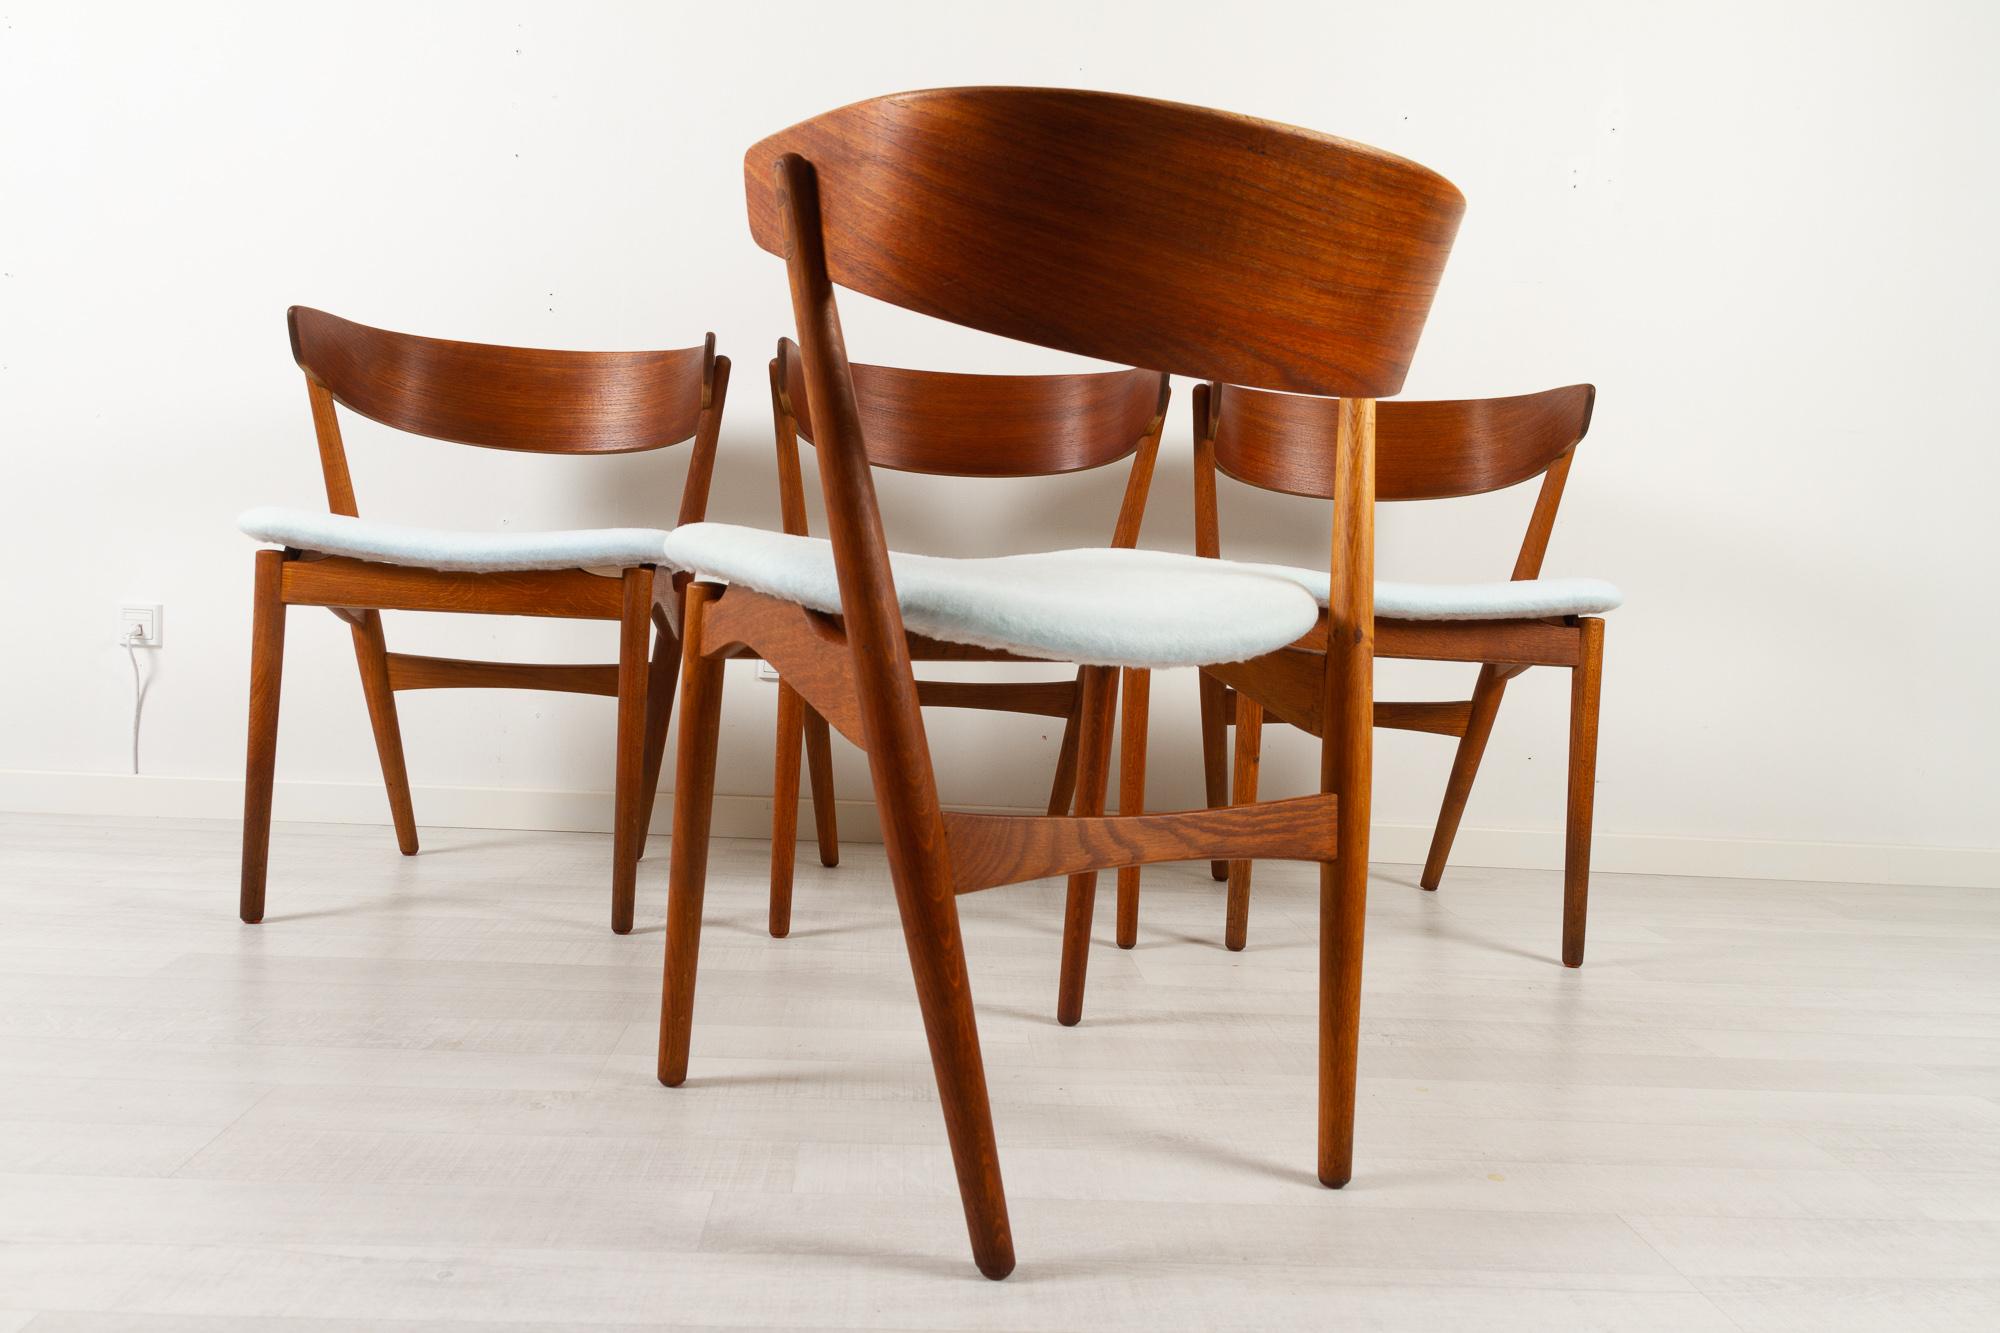 Vintage Danish Teak Dining Chairs No. 7 by Helge Sibast 1960s Set of 4 For Sale 8